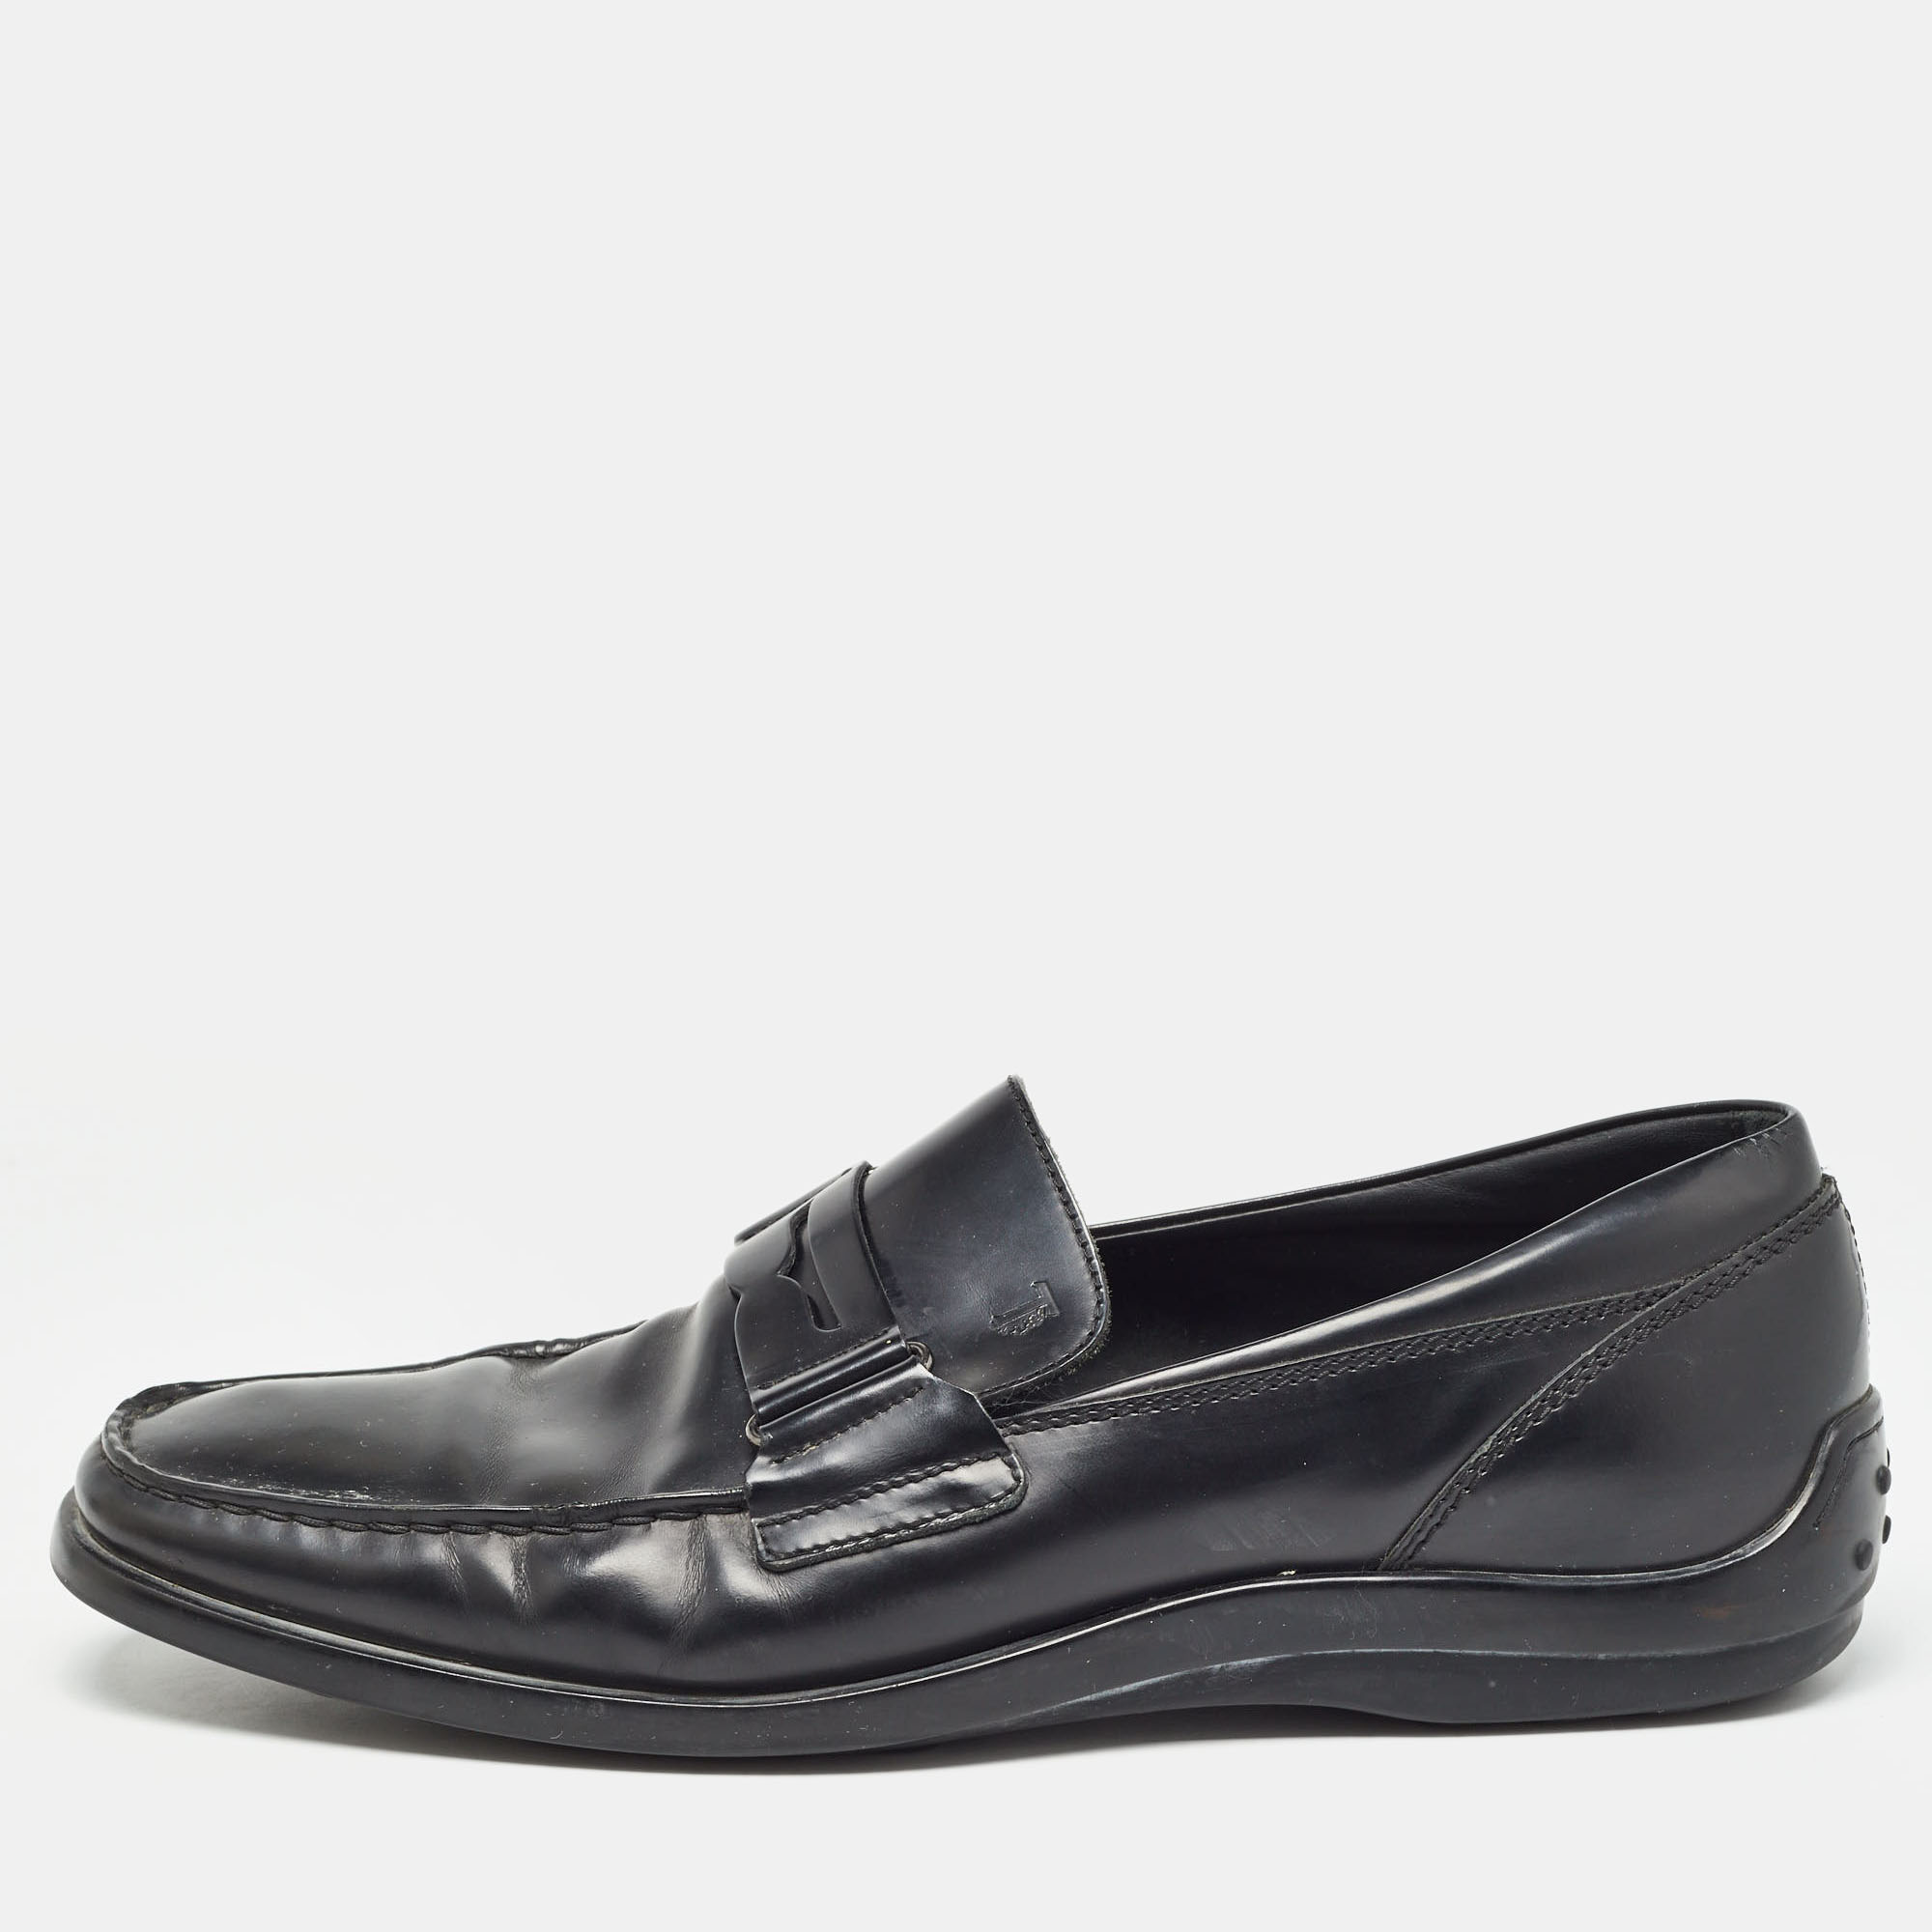 

Tod's Black Leather Penny Slip On Loafers Size 43